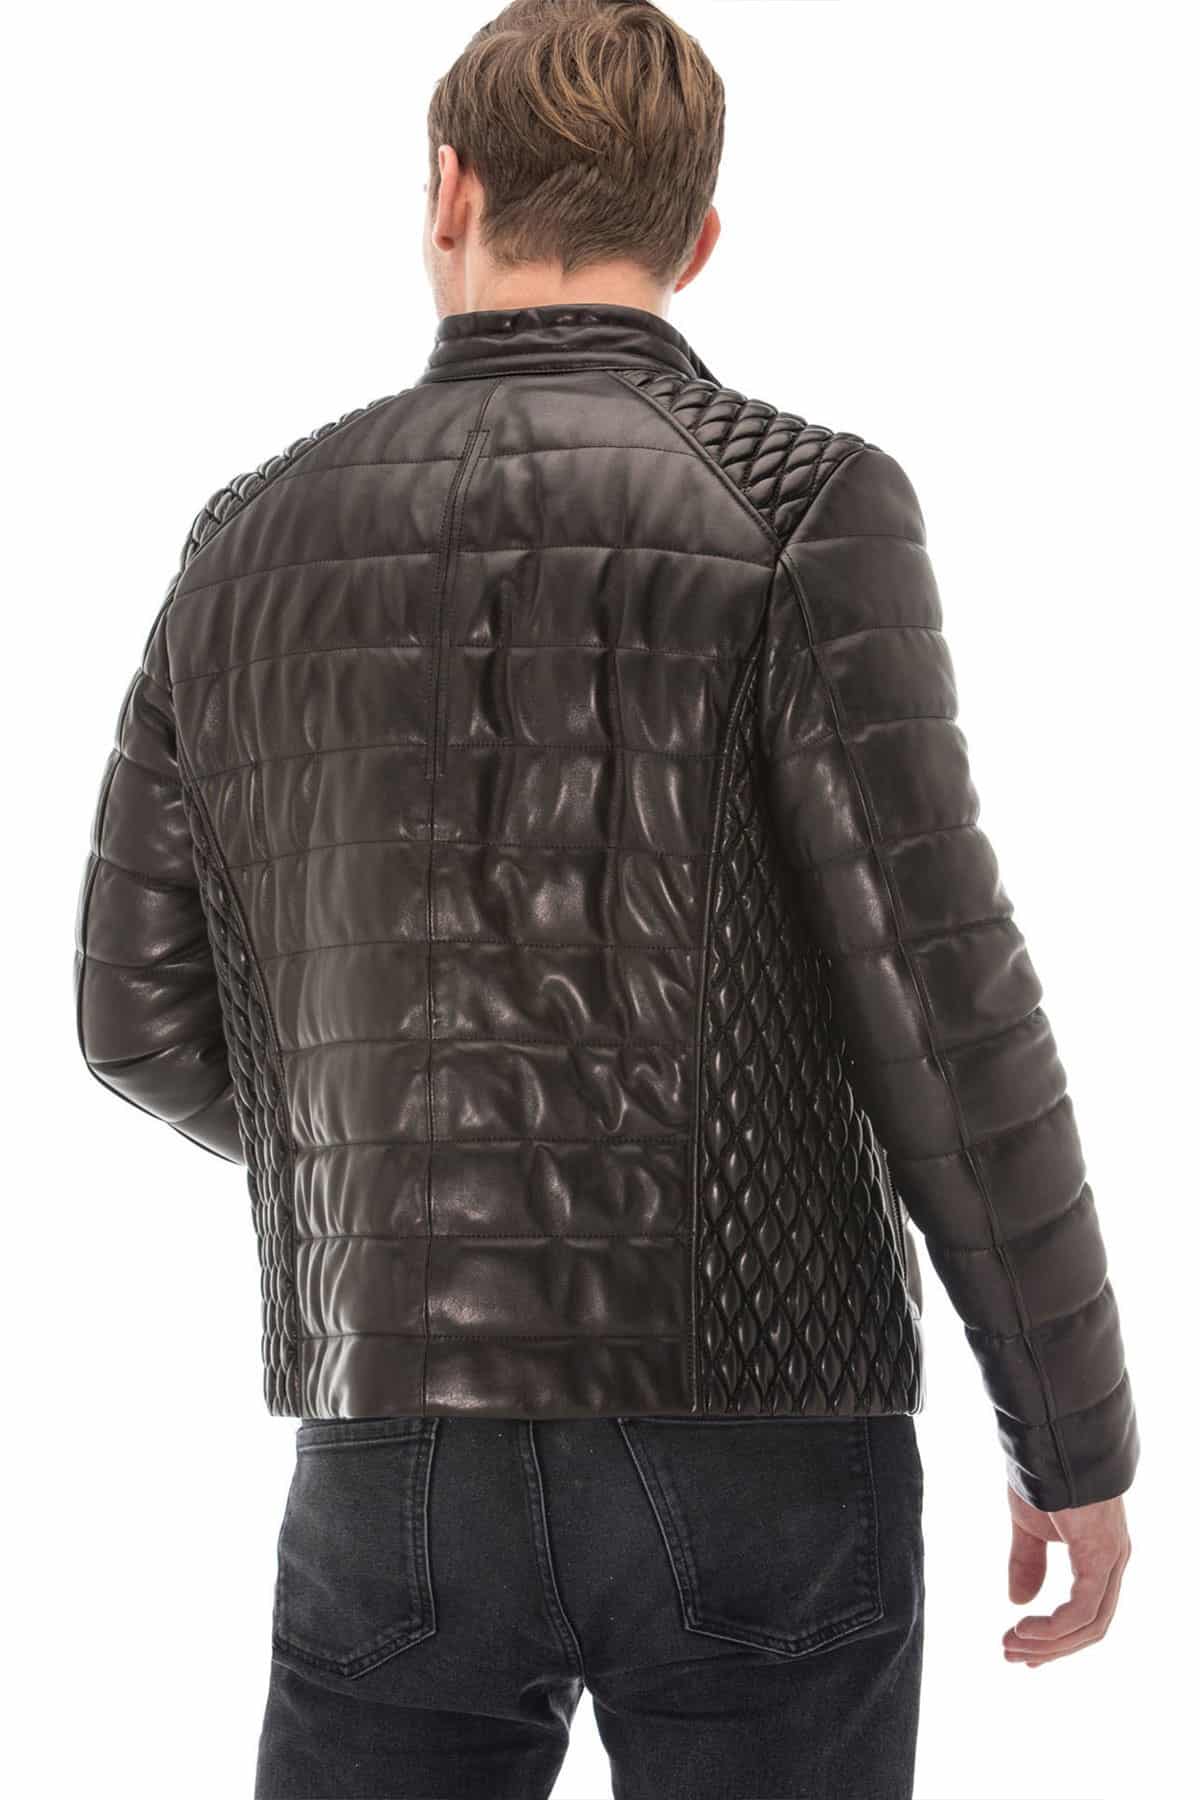 Mens Leather Urban Style Street Hoodie Jacket with Diamond Quilting. 